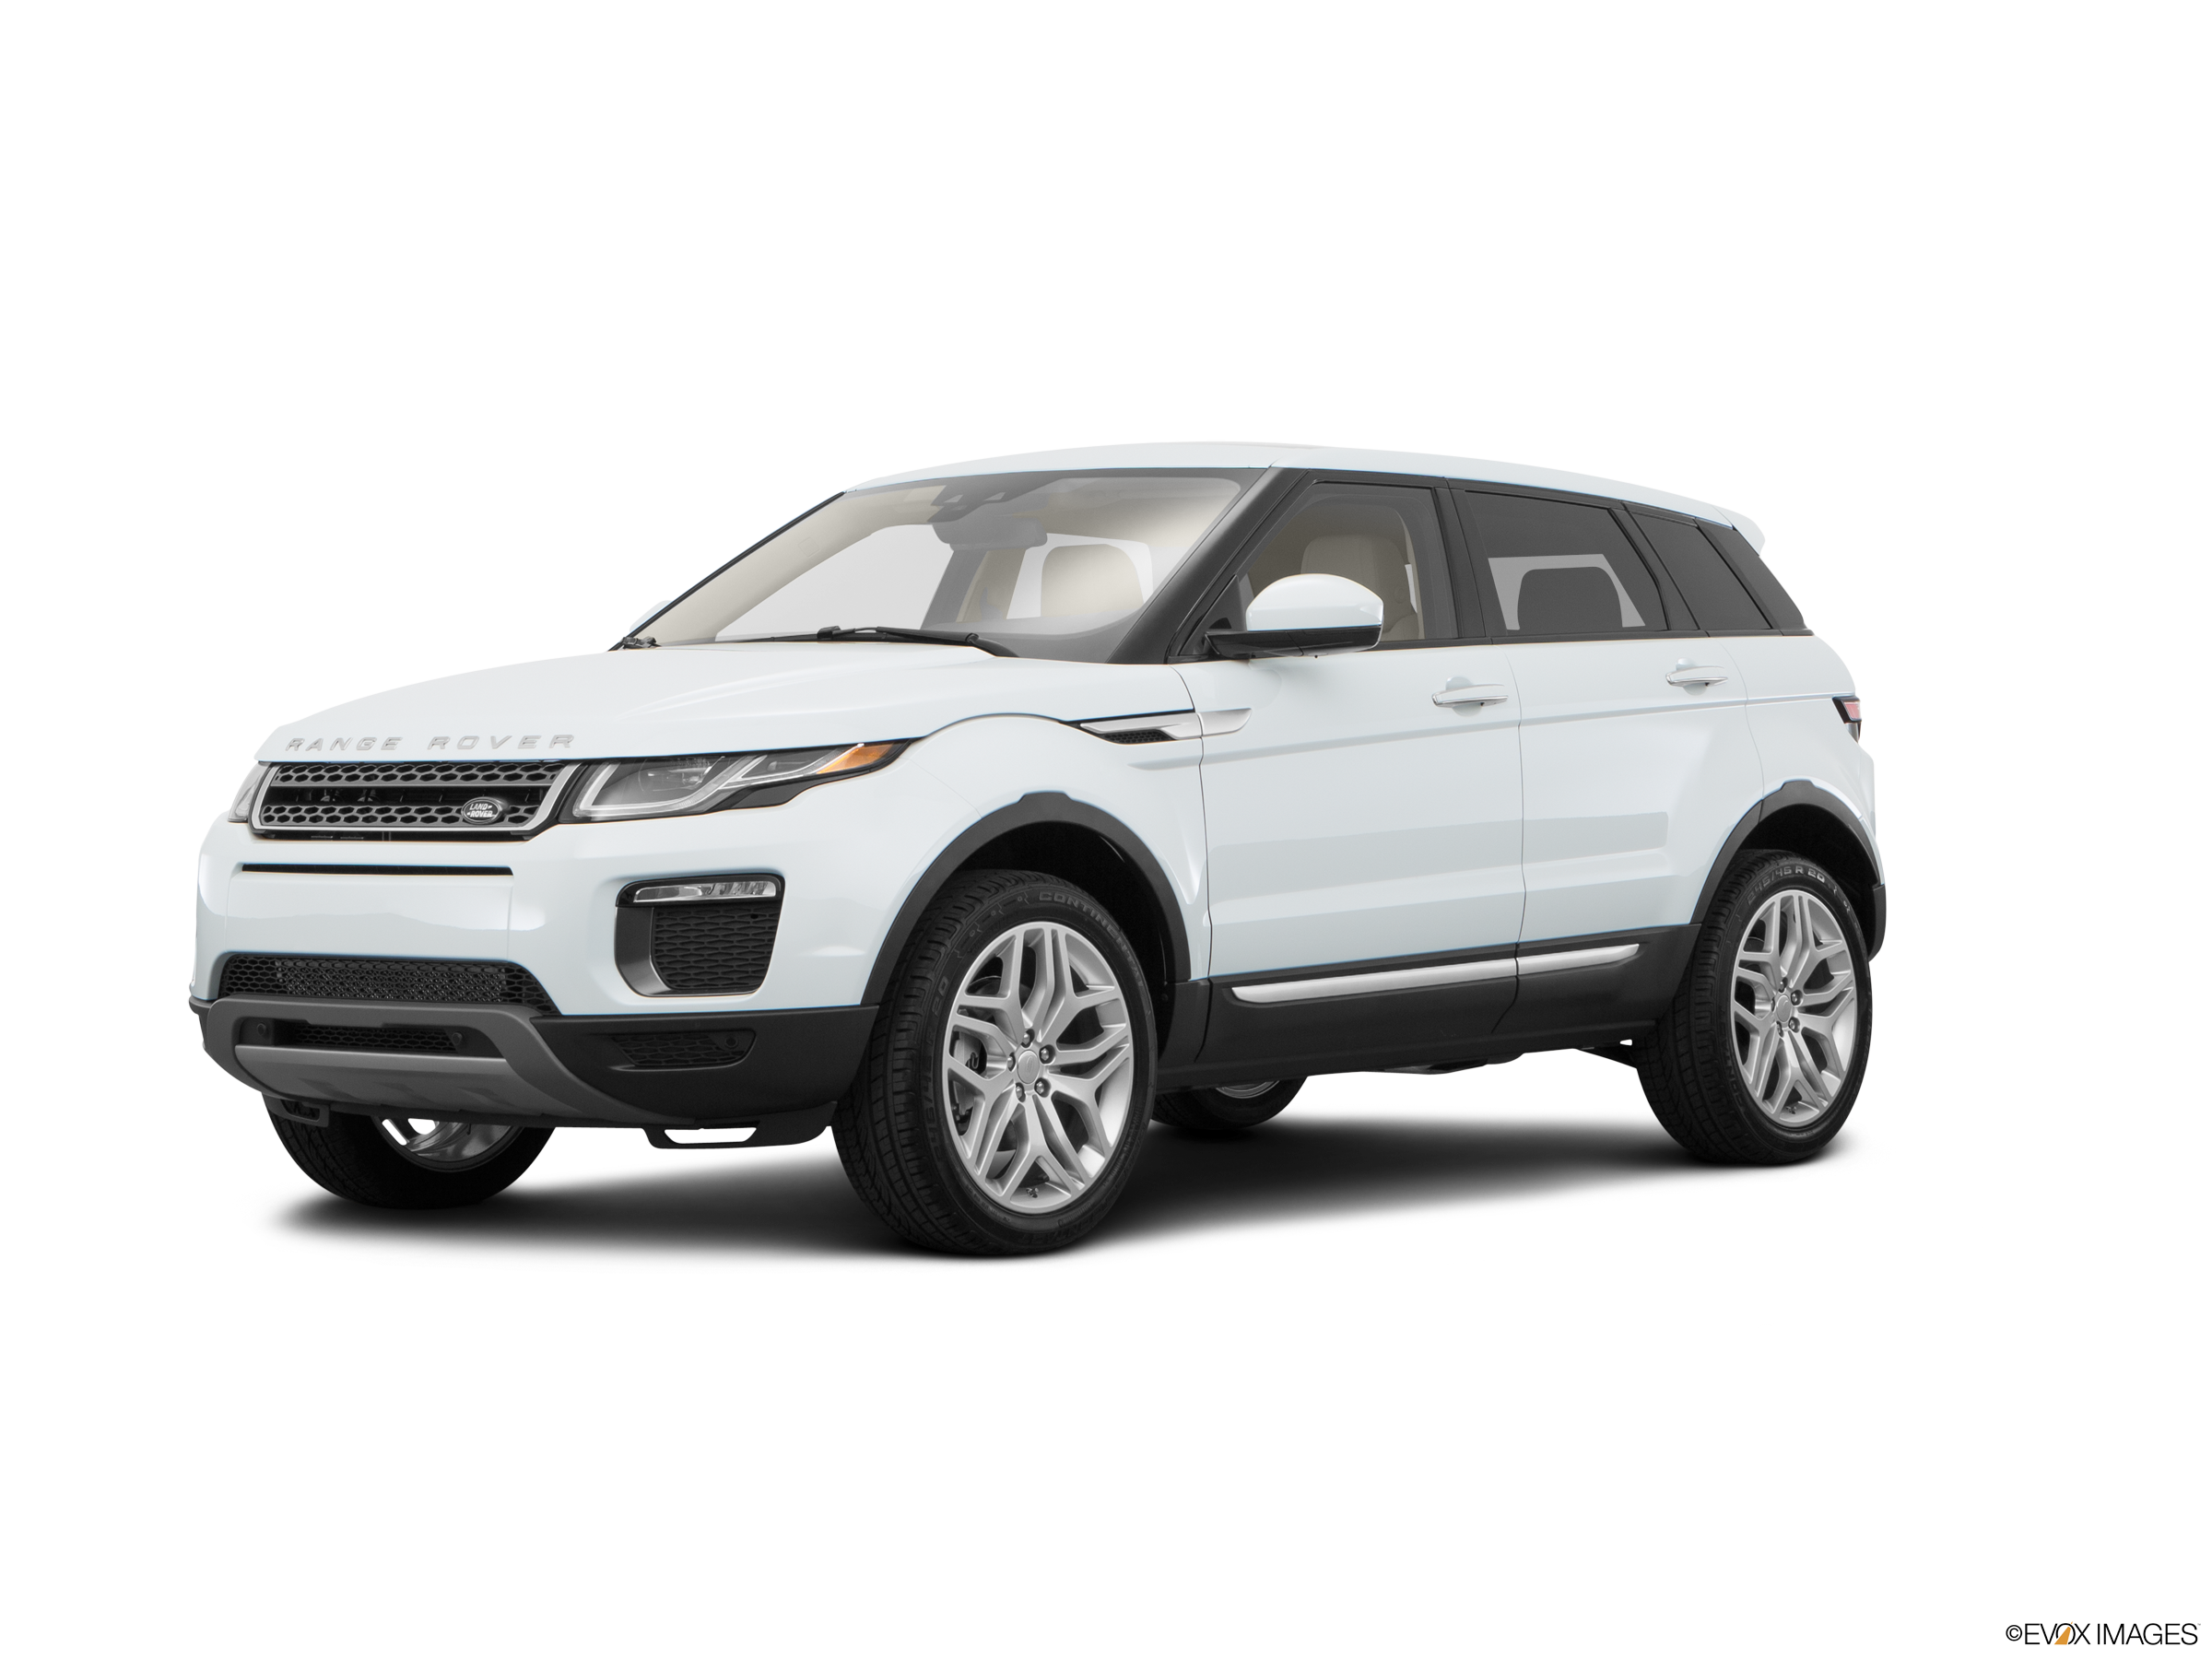 https://file.kelleybluebookimages.com/kbb/base/evox/CP/10744/2016-Land%20Rover-Range%20Rover%20Evoque-front_10744_032_2400x1800_1AA.png